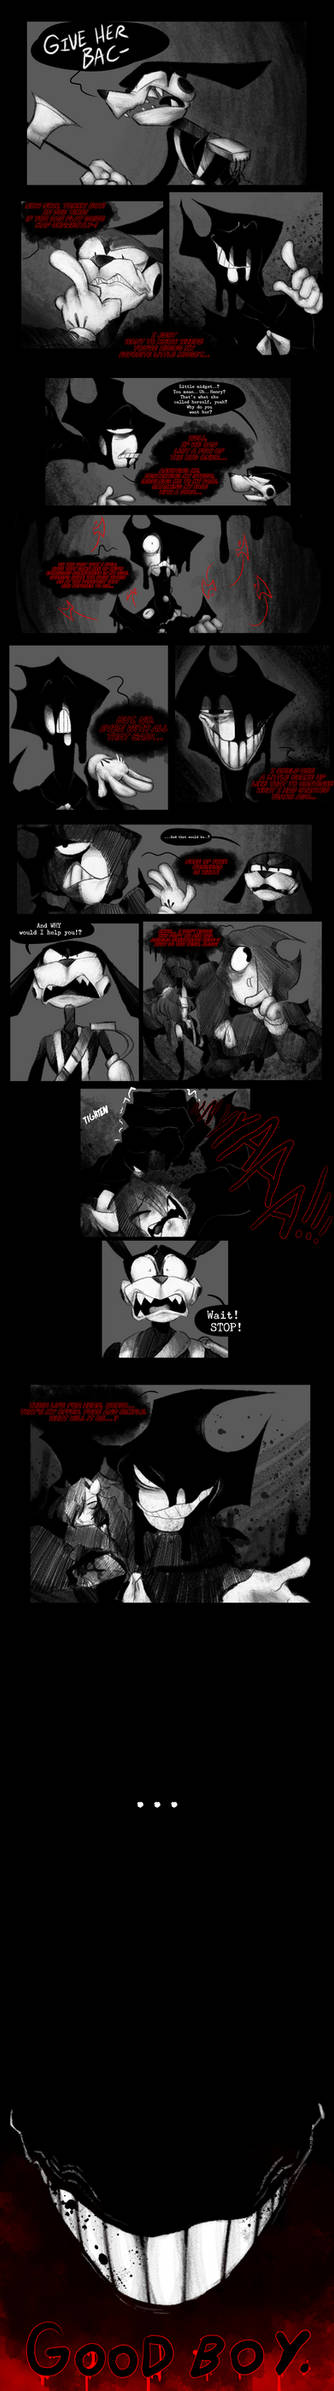 Bendy and the ink machine pt 89